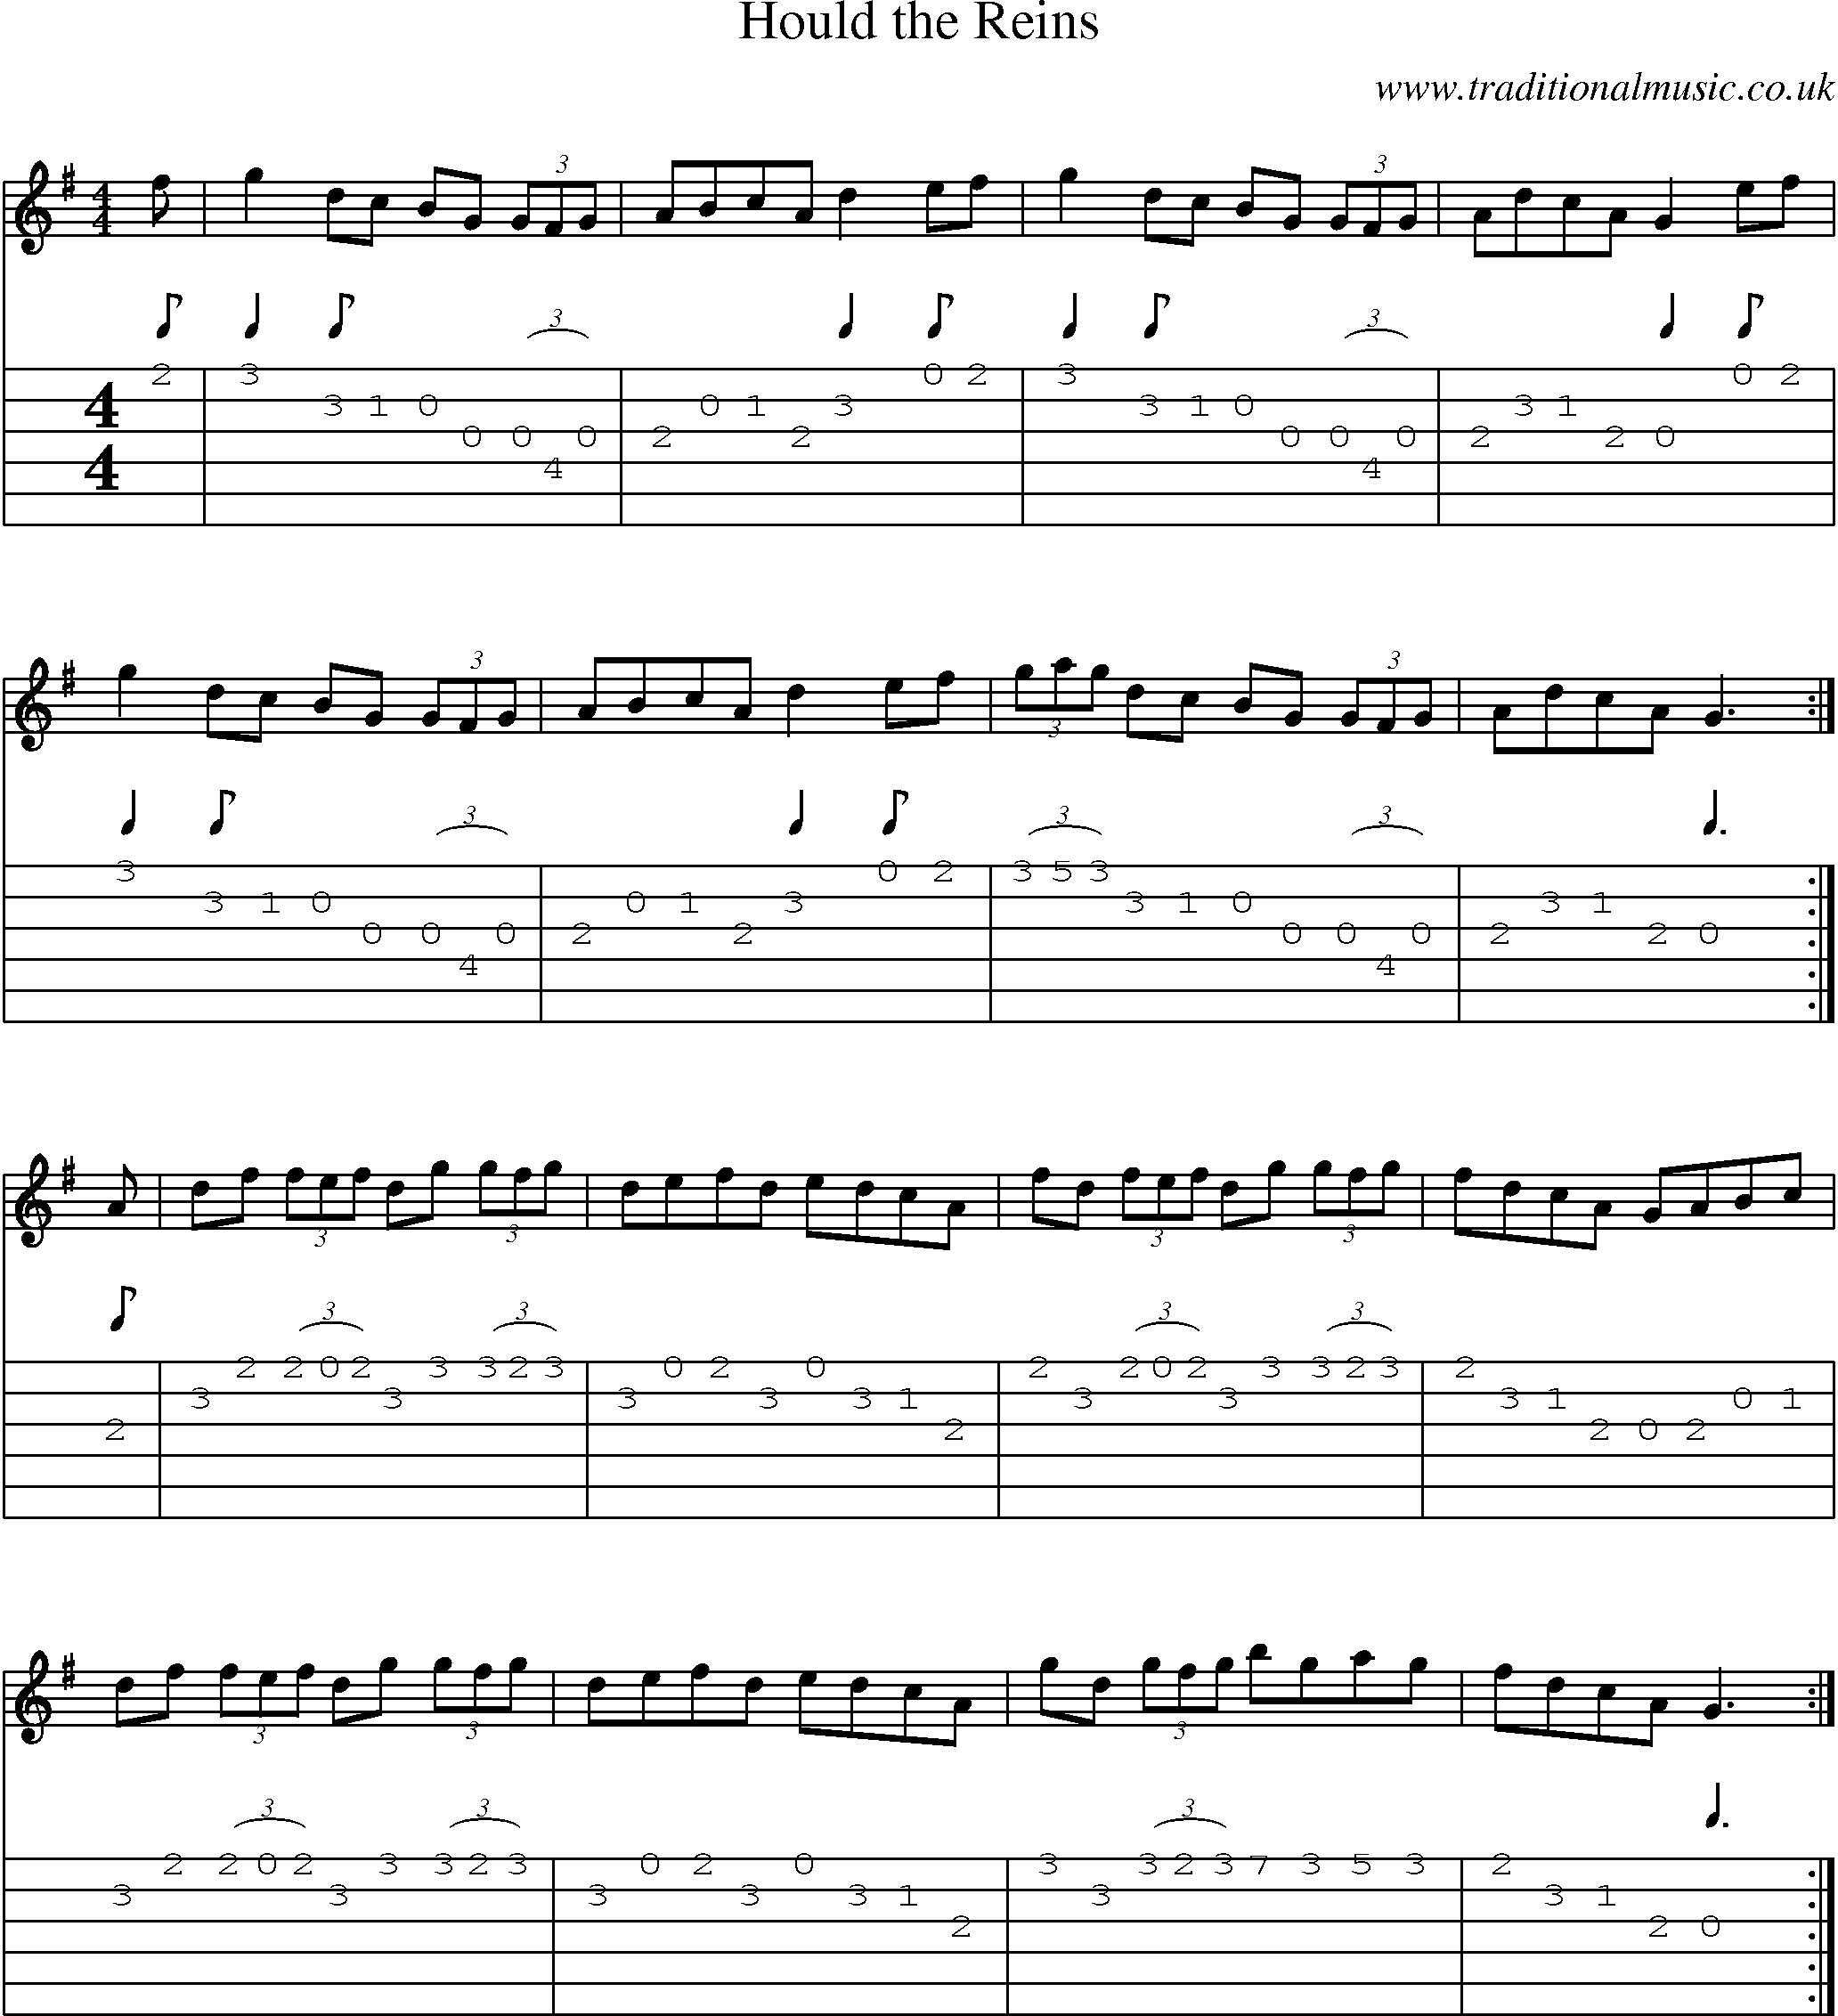 Music Score and Guitar Tabs for Hould Reins